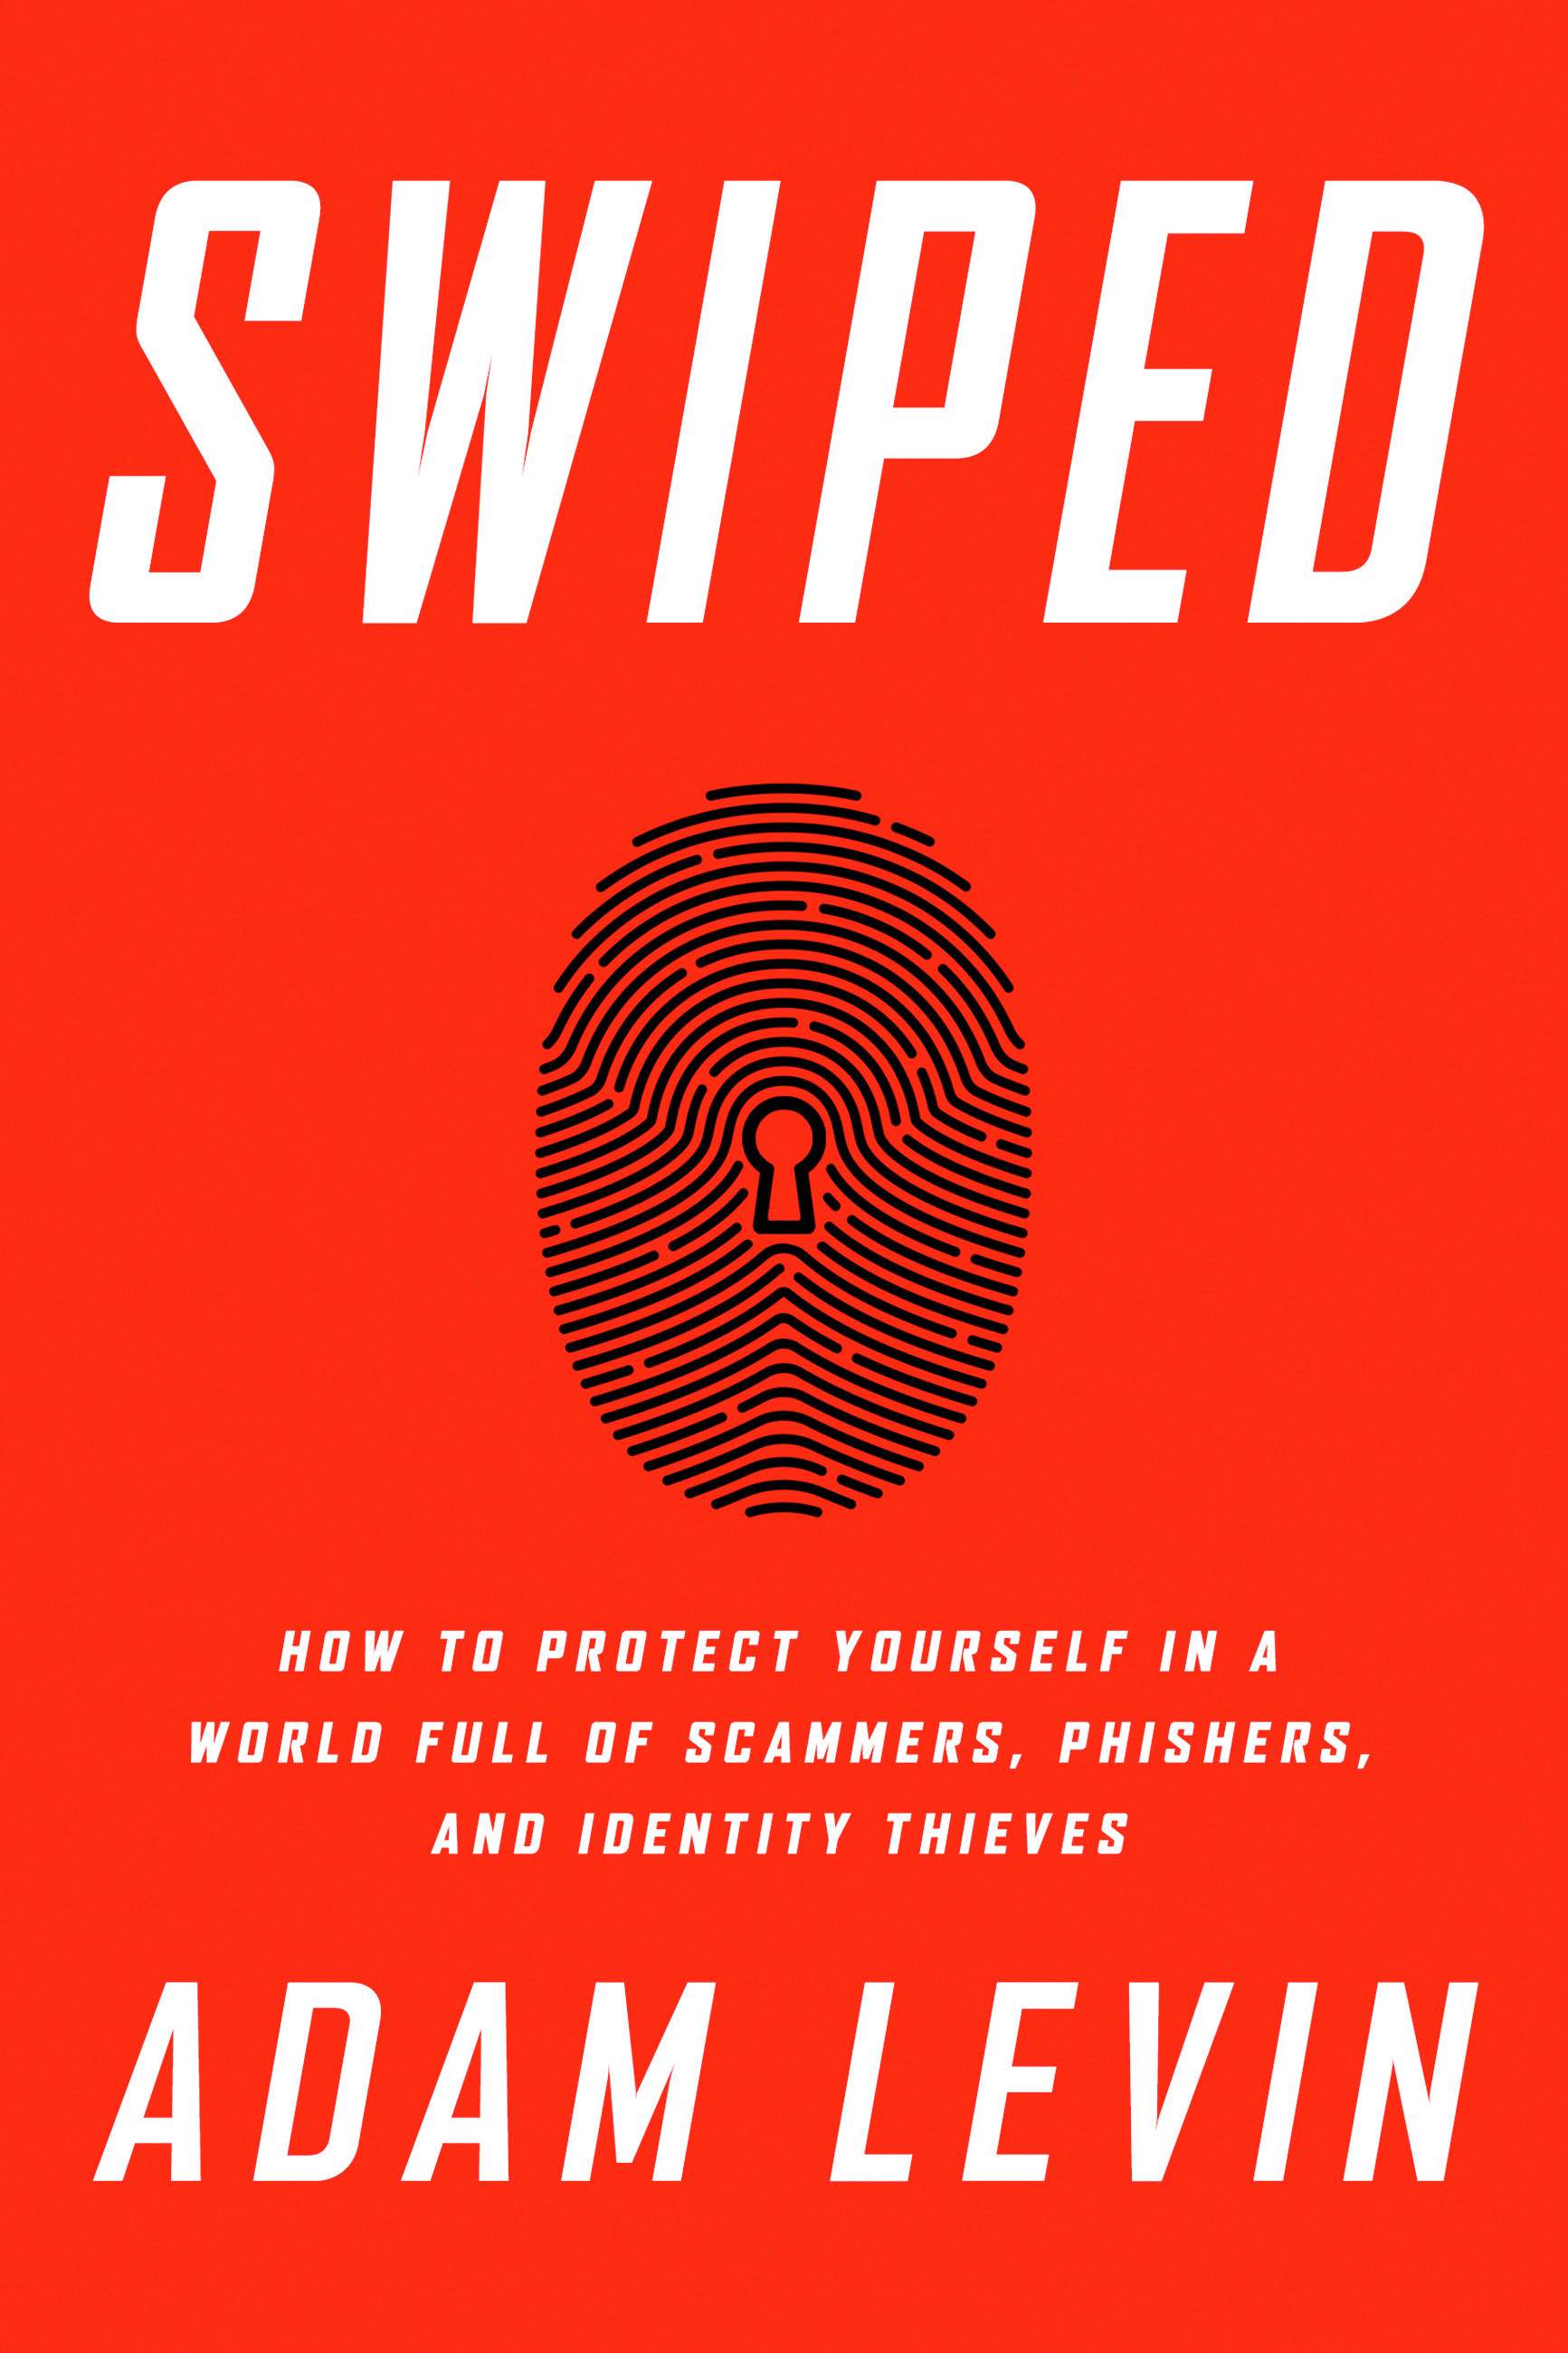 Swiped Book Review: How to Protect Yourself in a World Full of Scammers, Phishers, and Identity Thieves